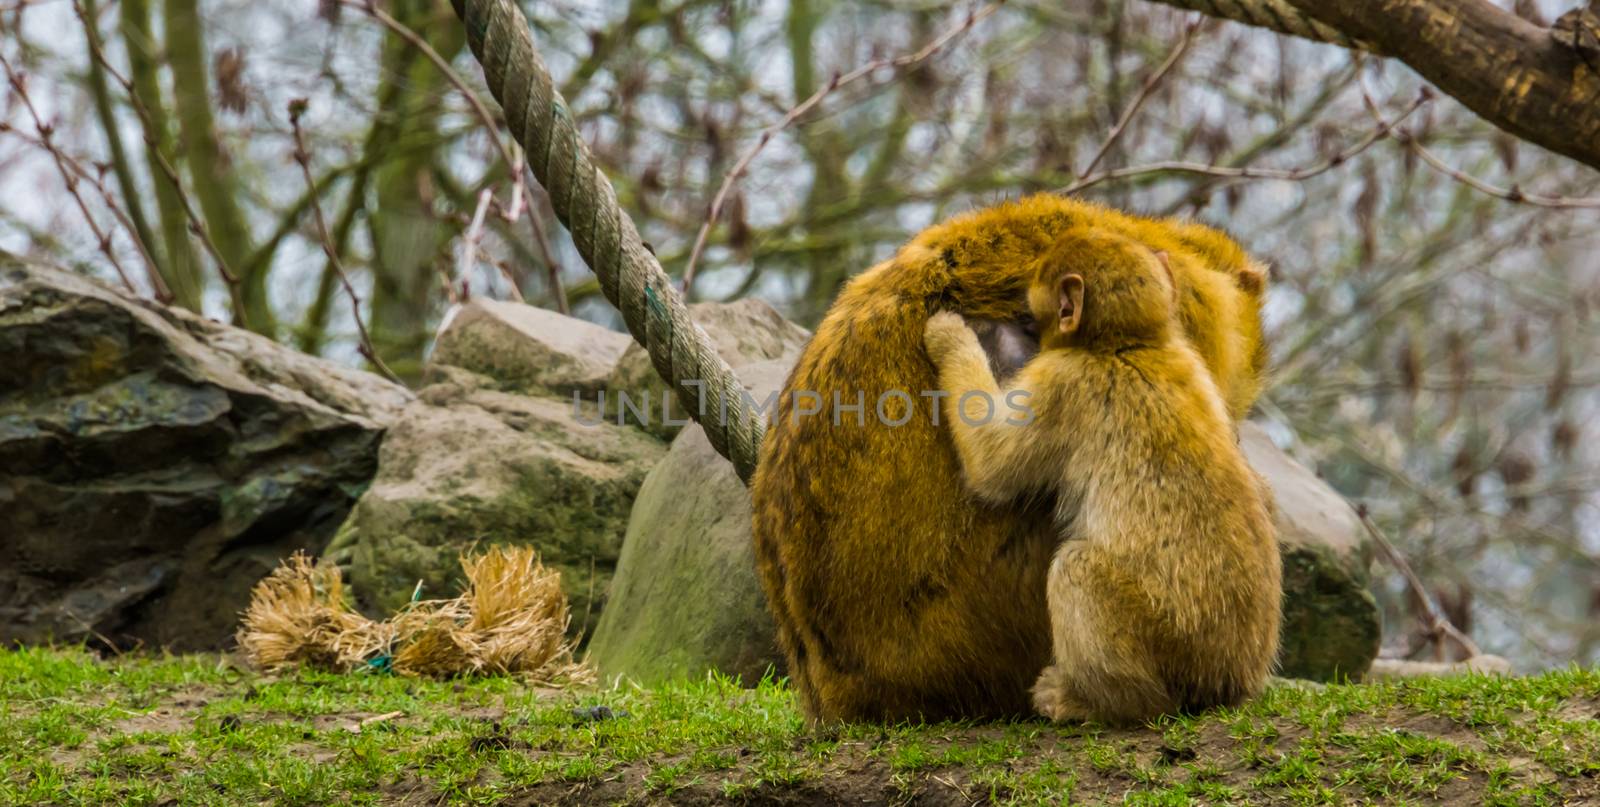 juvenile barbary macaque picking fleas from its mother, animals grooming each other, typical monkey behavior by charlottebleijenberg